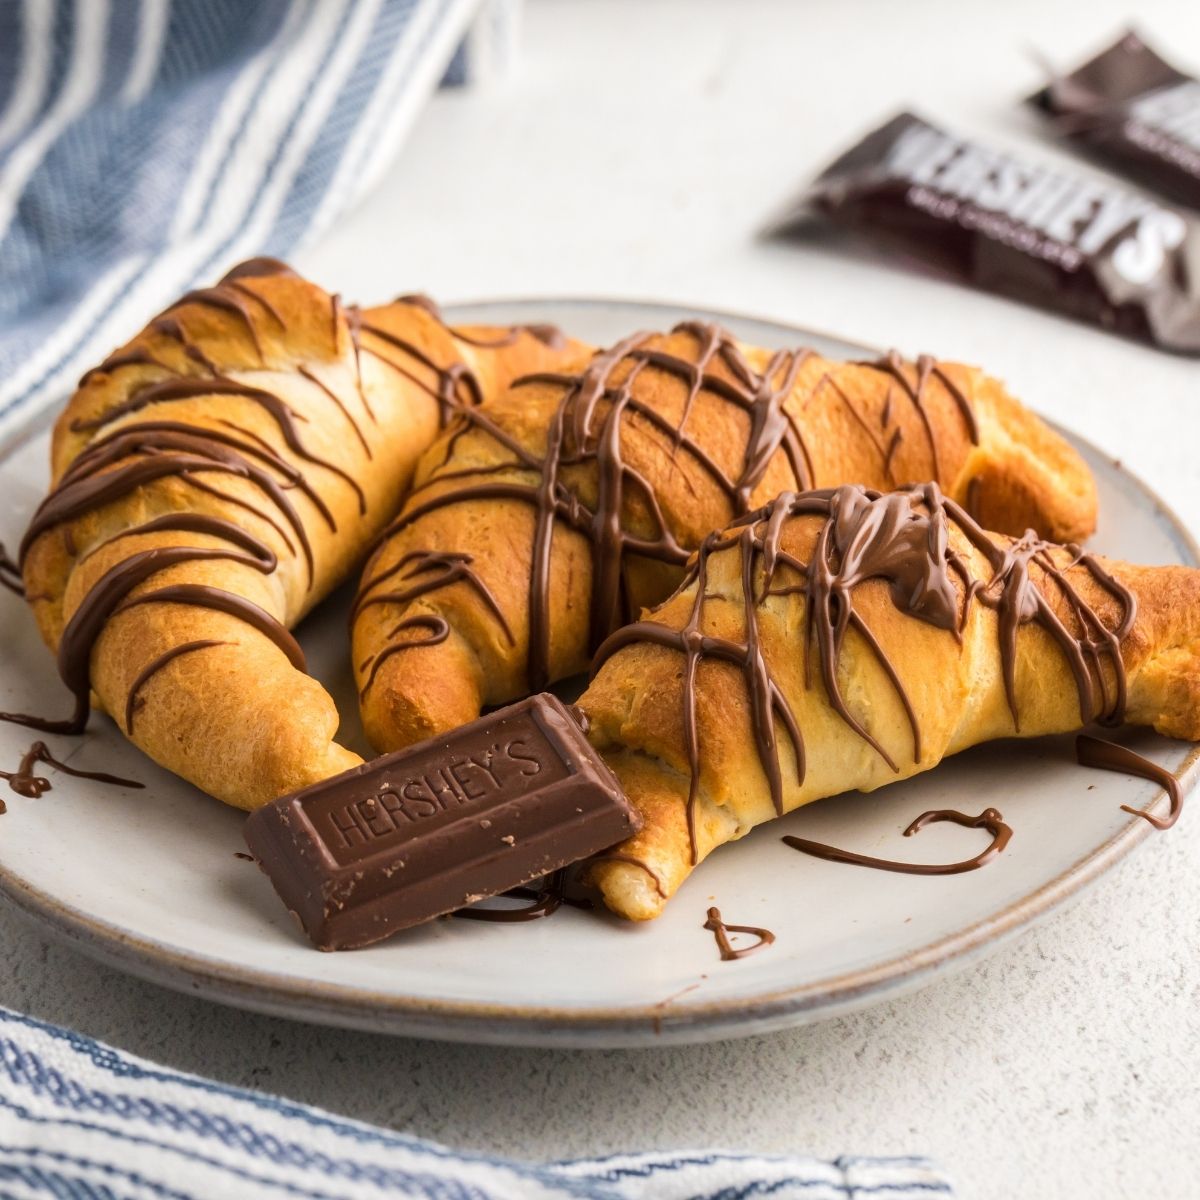 Golden chocolate drizzled crescent rolls in the shape of croissants